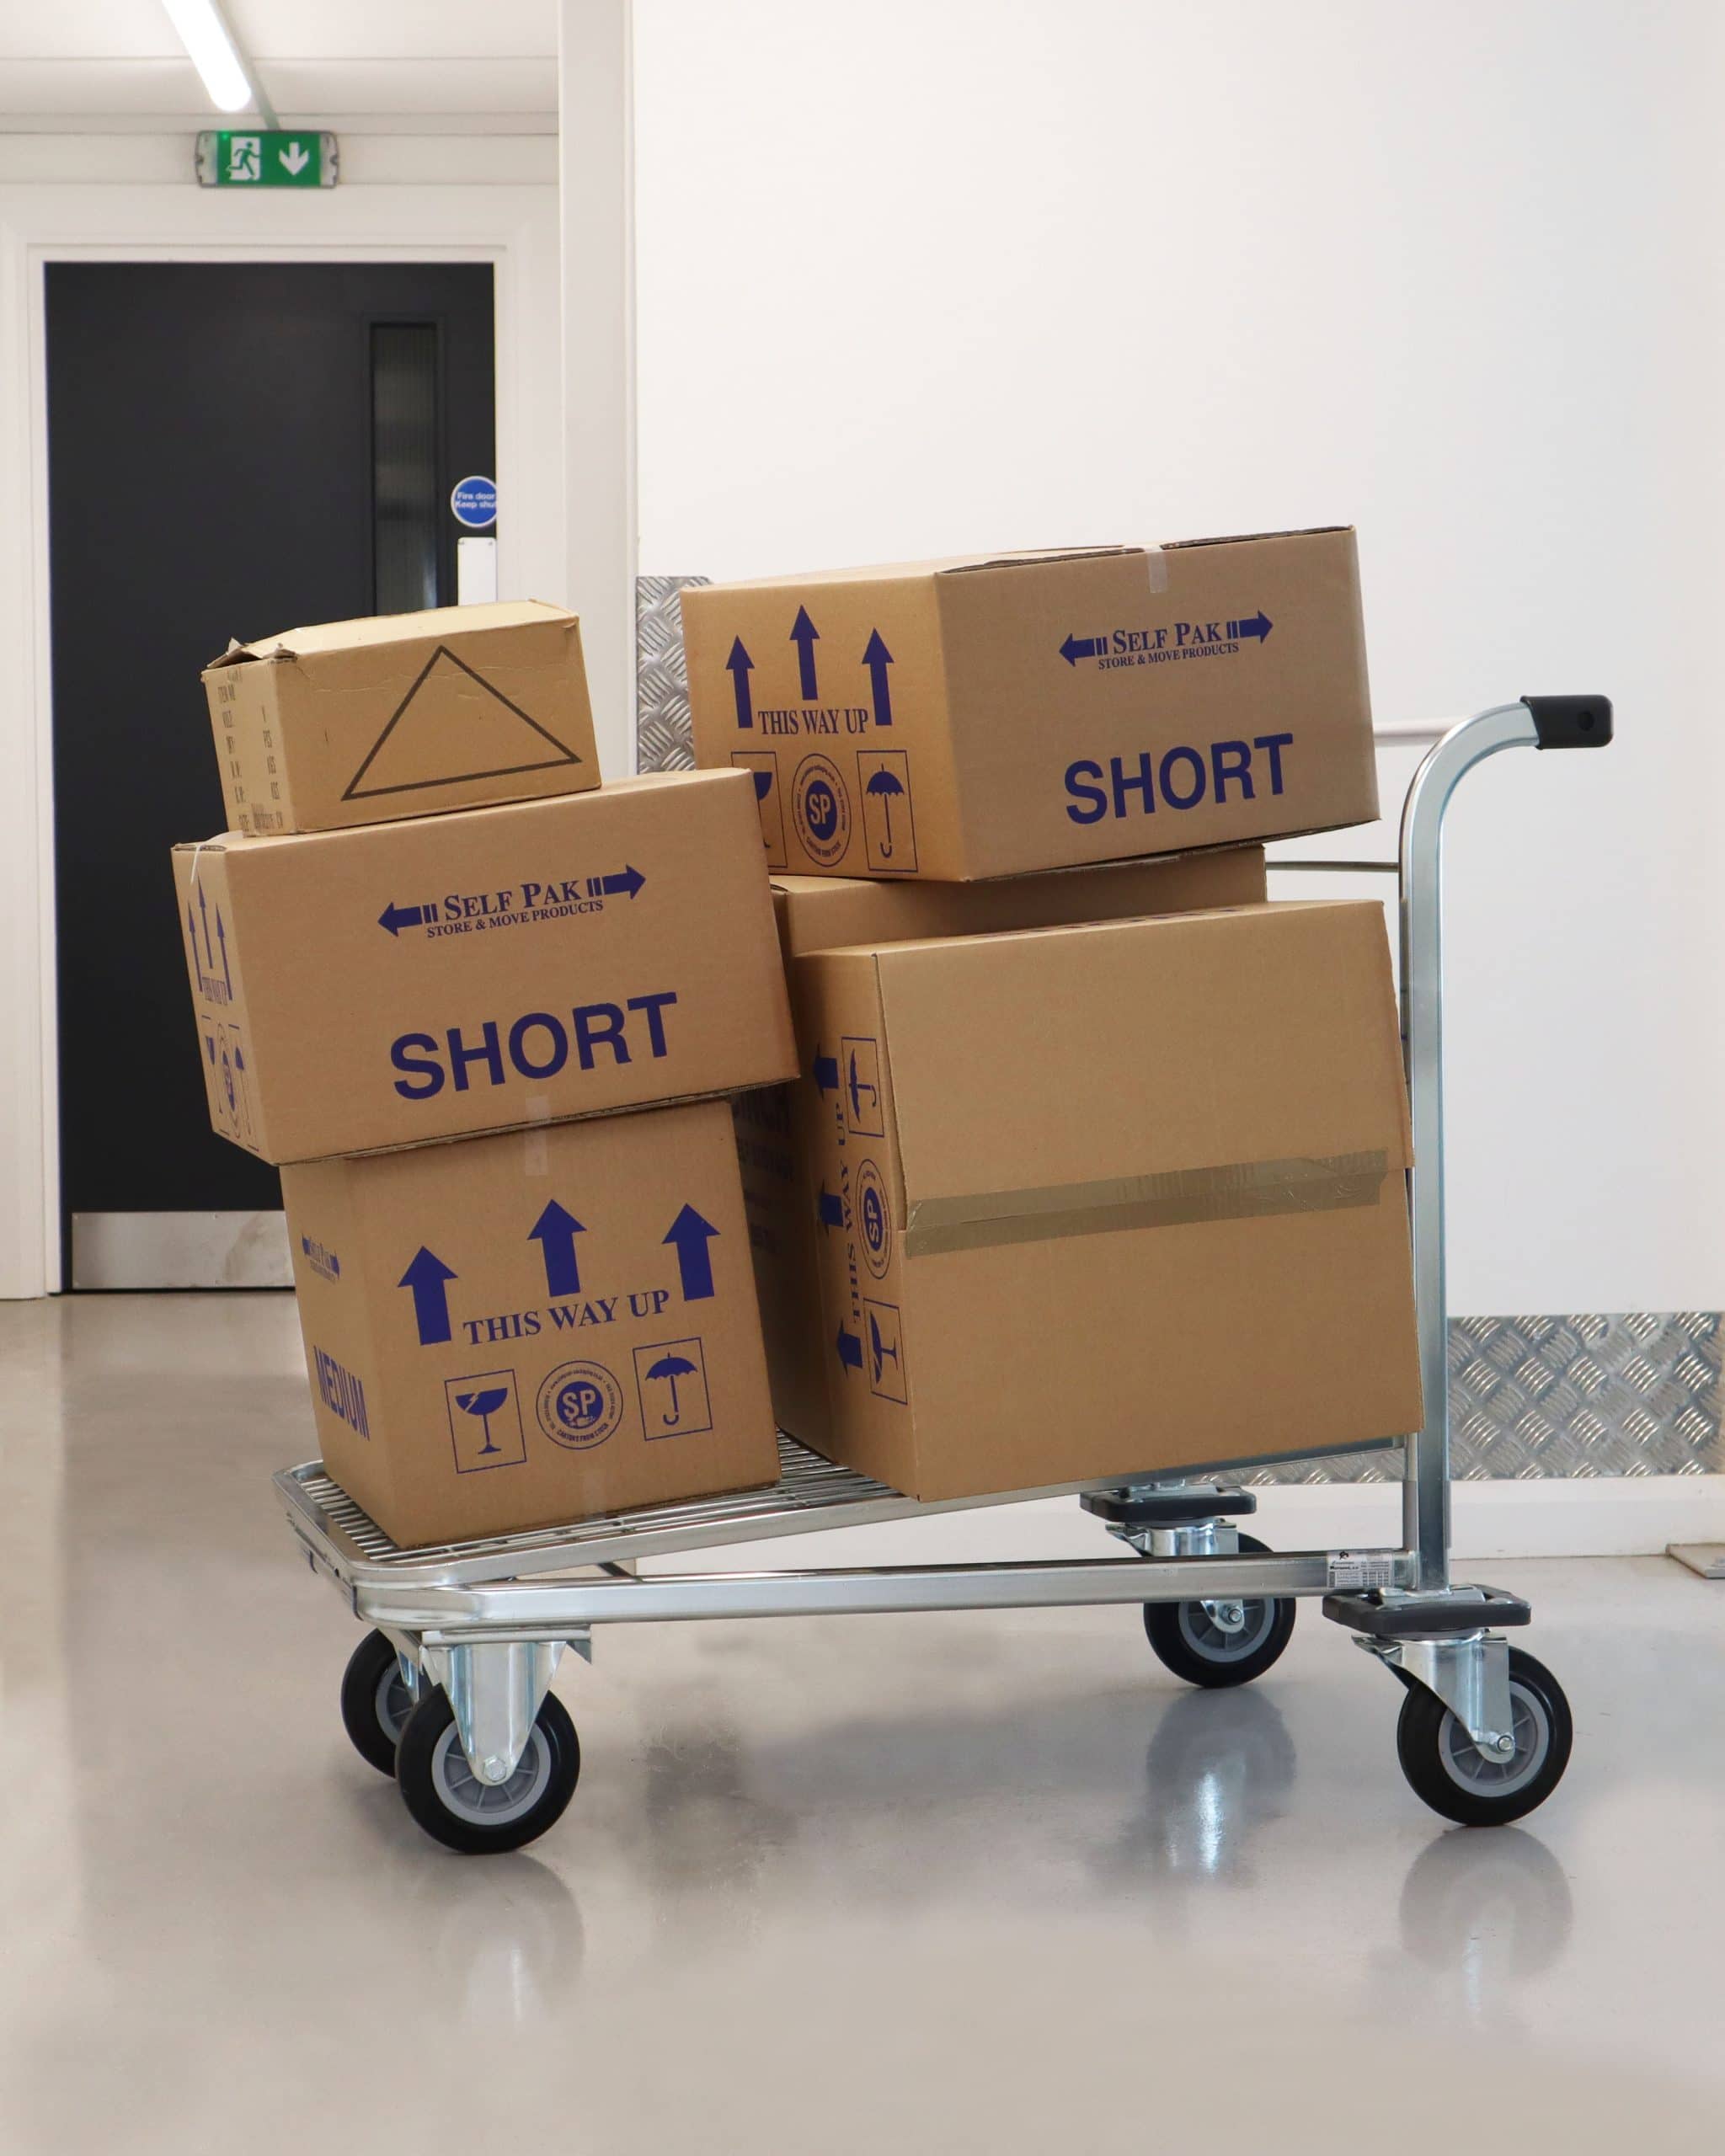 Short storage boxes on trolley